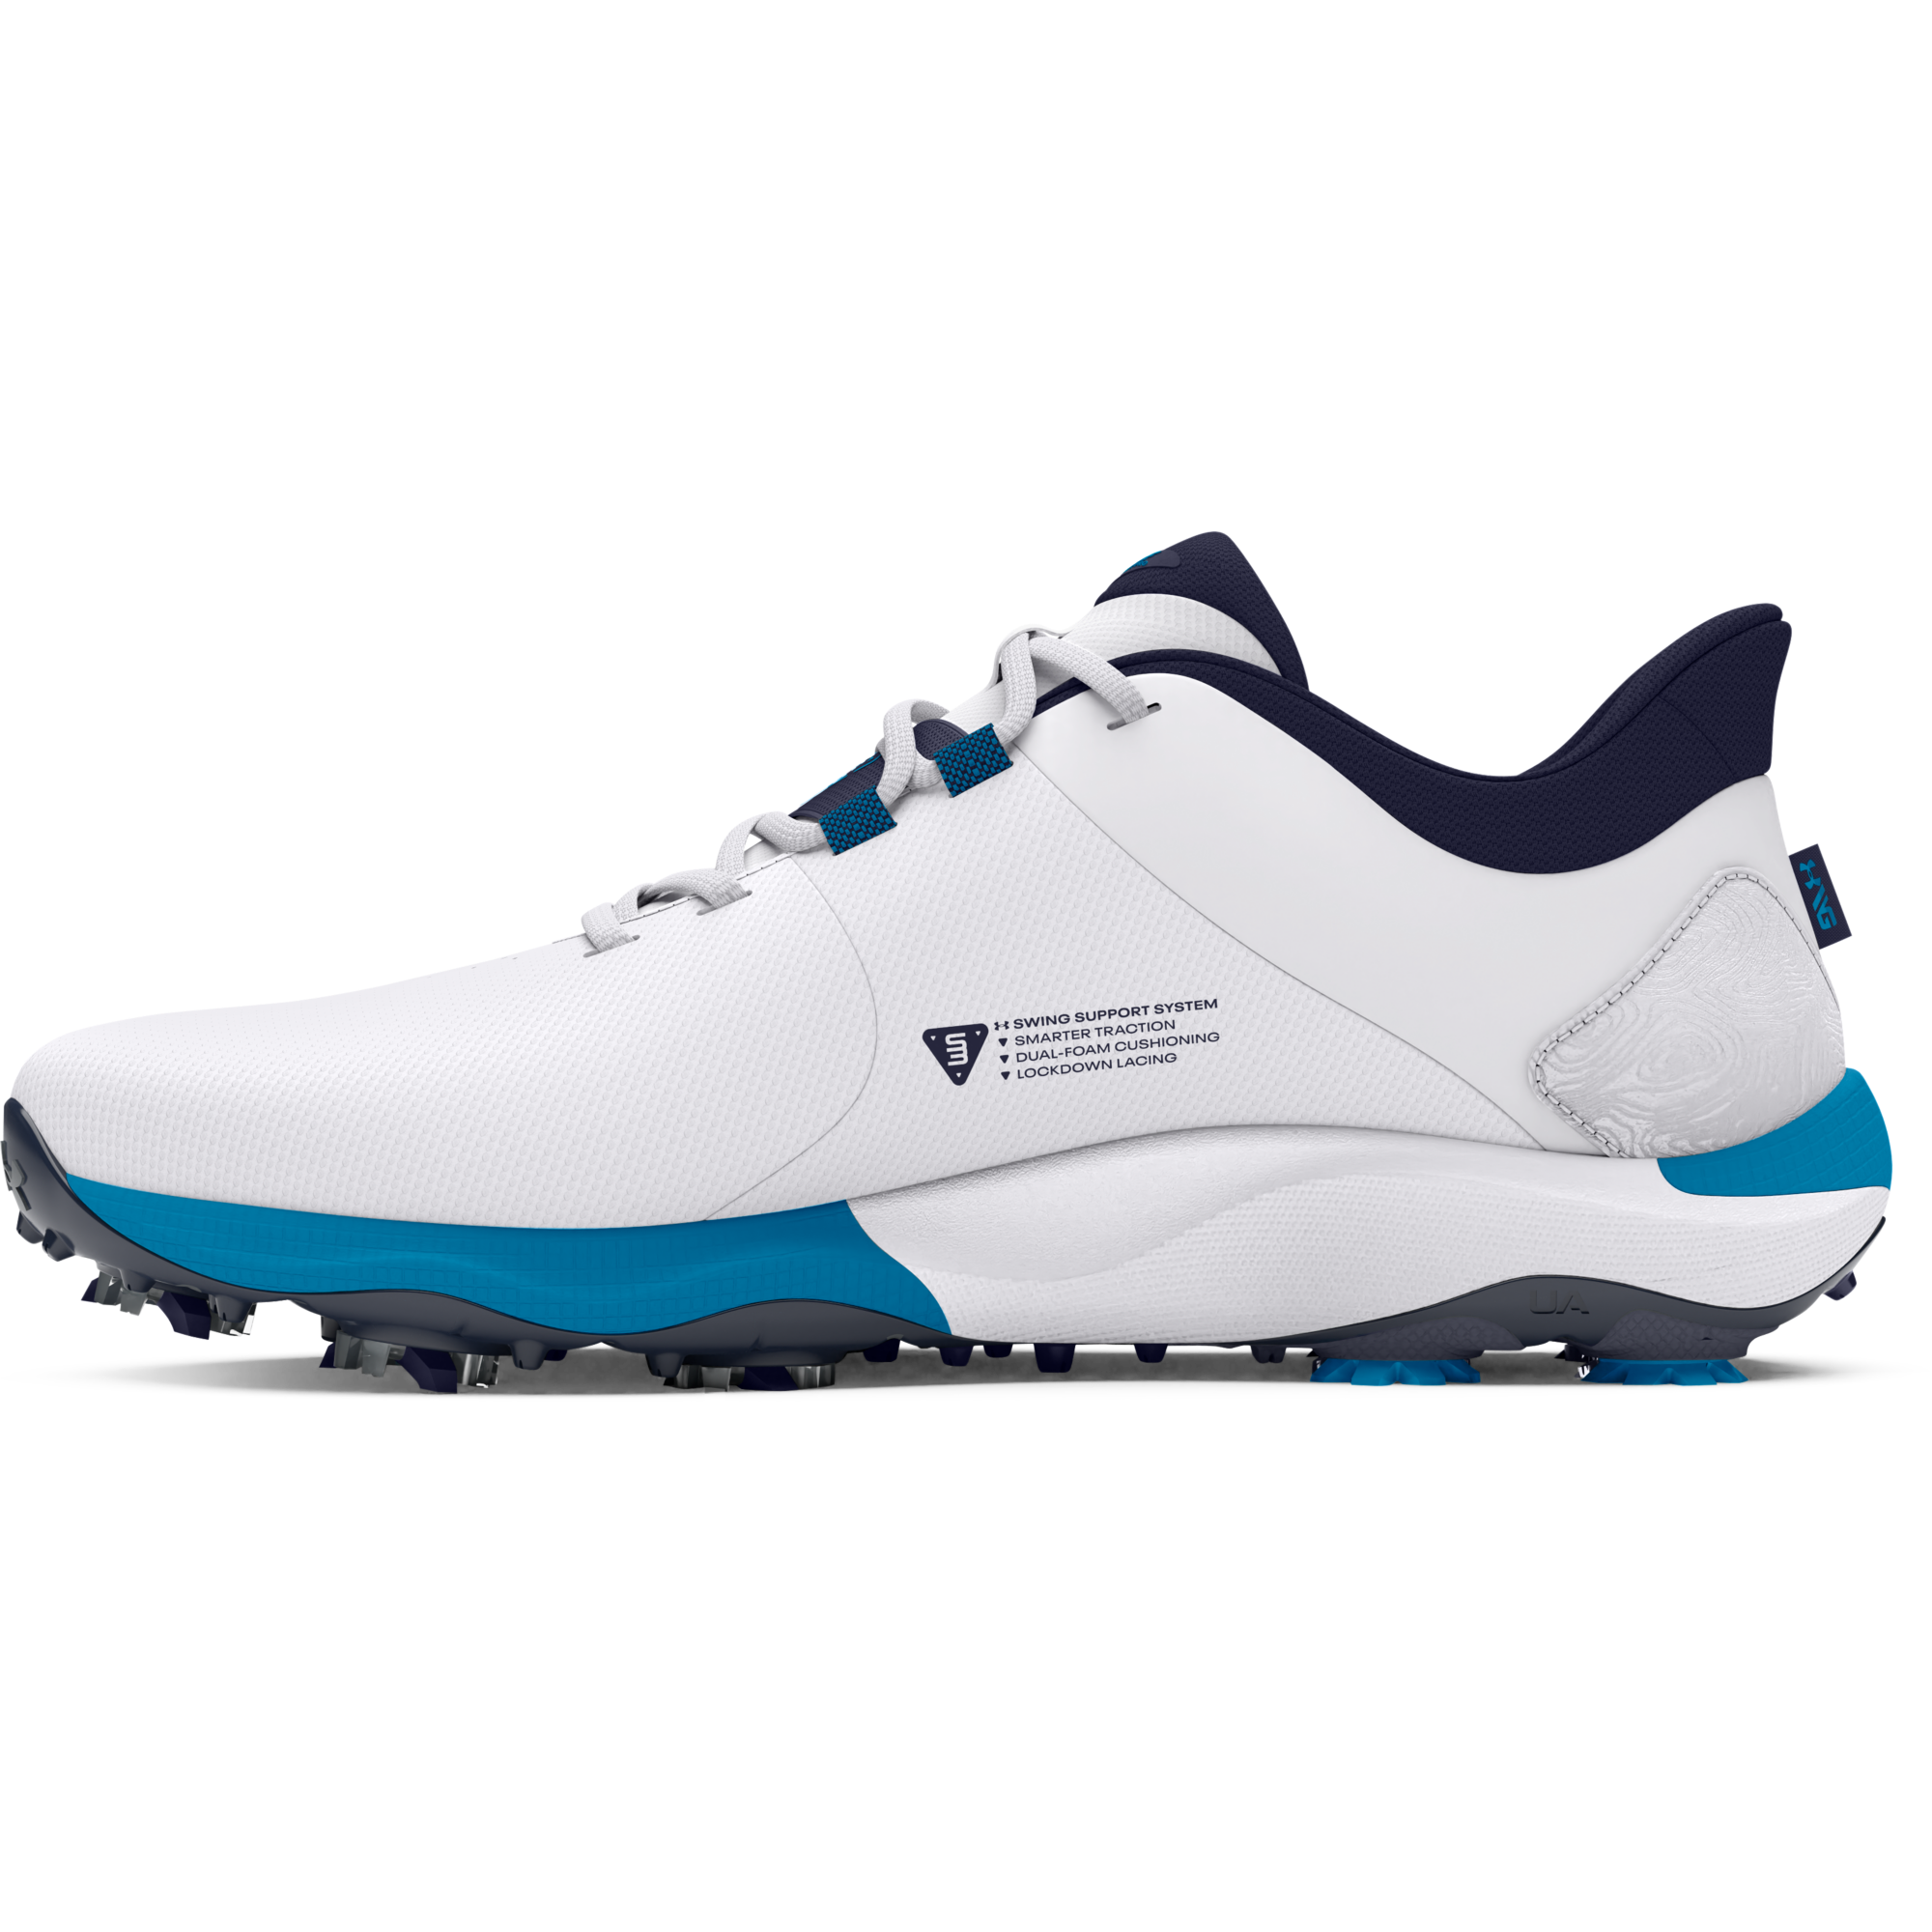 Toa Primitive Solheim Special Edition Golf Shoes - Elite Experience